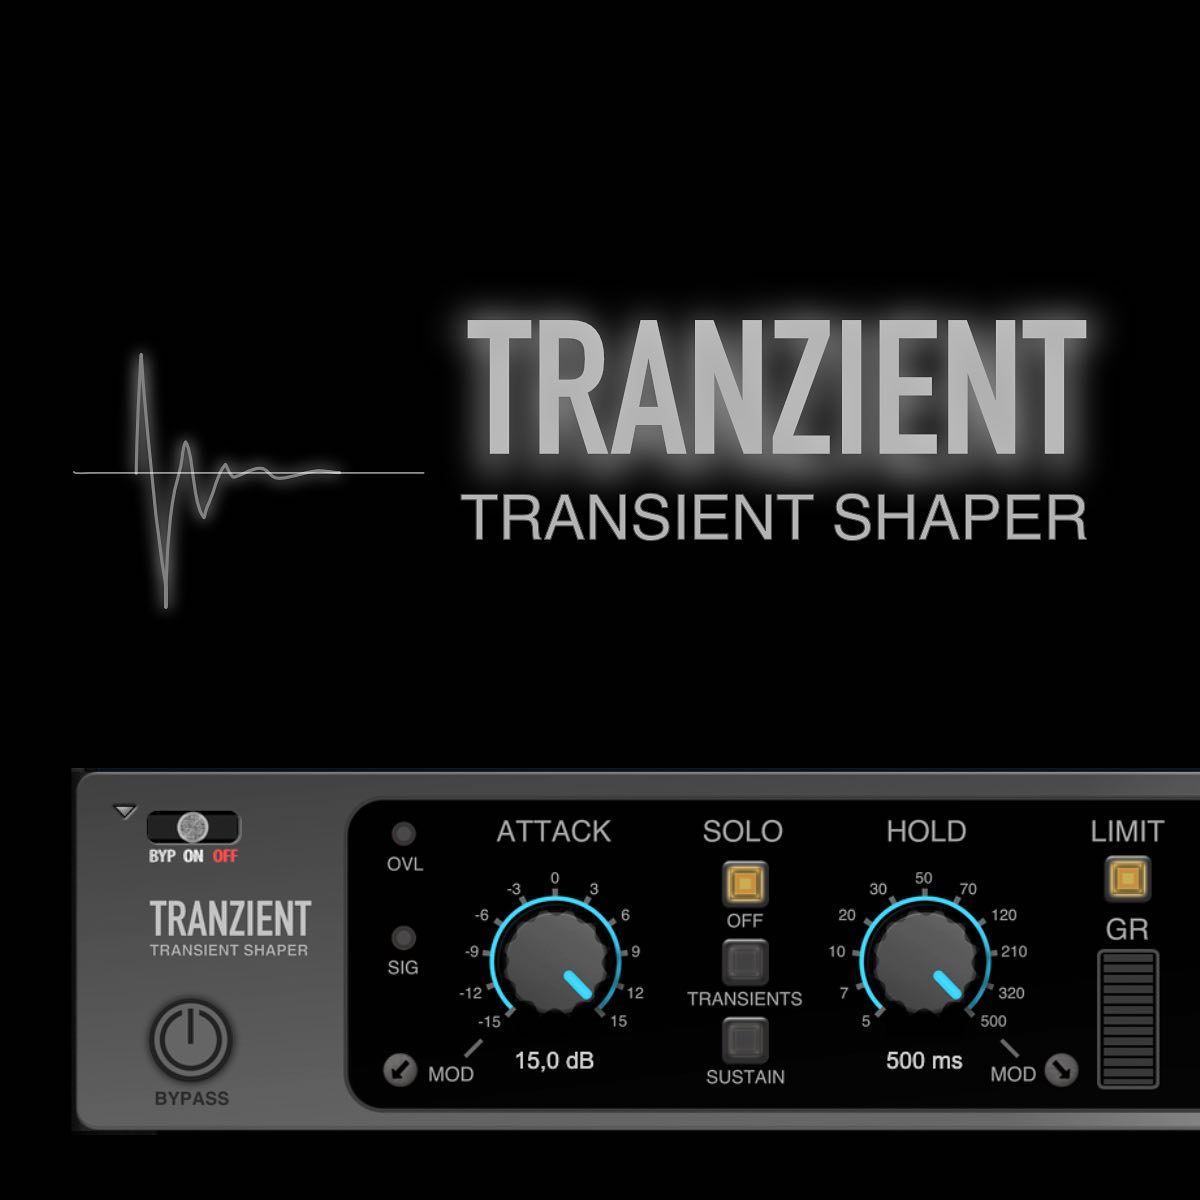 TRANZIENT Transient Shaper manipulates the attack
and holds parameters of a signal regardless of level.
Usually, equalizers are used for the tonal parameters
of the signal, but not the temporal parameters.
Manipulation of Attack and sustain parameters can
help to make the signal sound more transparent.
Turn2on TRANZIENT Rack Extension is a modern take
on Transient shapers. It retains the basic functionality
with the addition of Transient or Sustain signal Solo
modes.
#transient #shaper #turn2on #rackextension #reasonstudios #effect #mastering #reason #reason12 #reasonrack #reasonrackplugin #tranzient 

https://www.reasonstudios.com/shop/rack-extension/tranzient-transient-shaper/